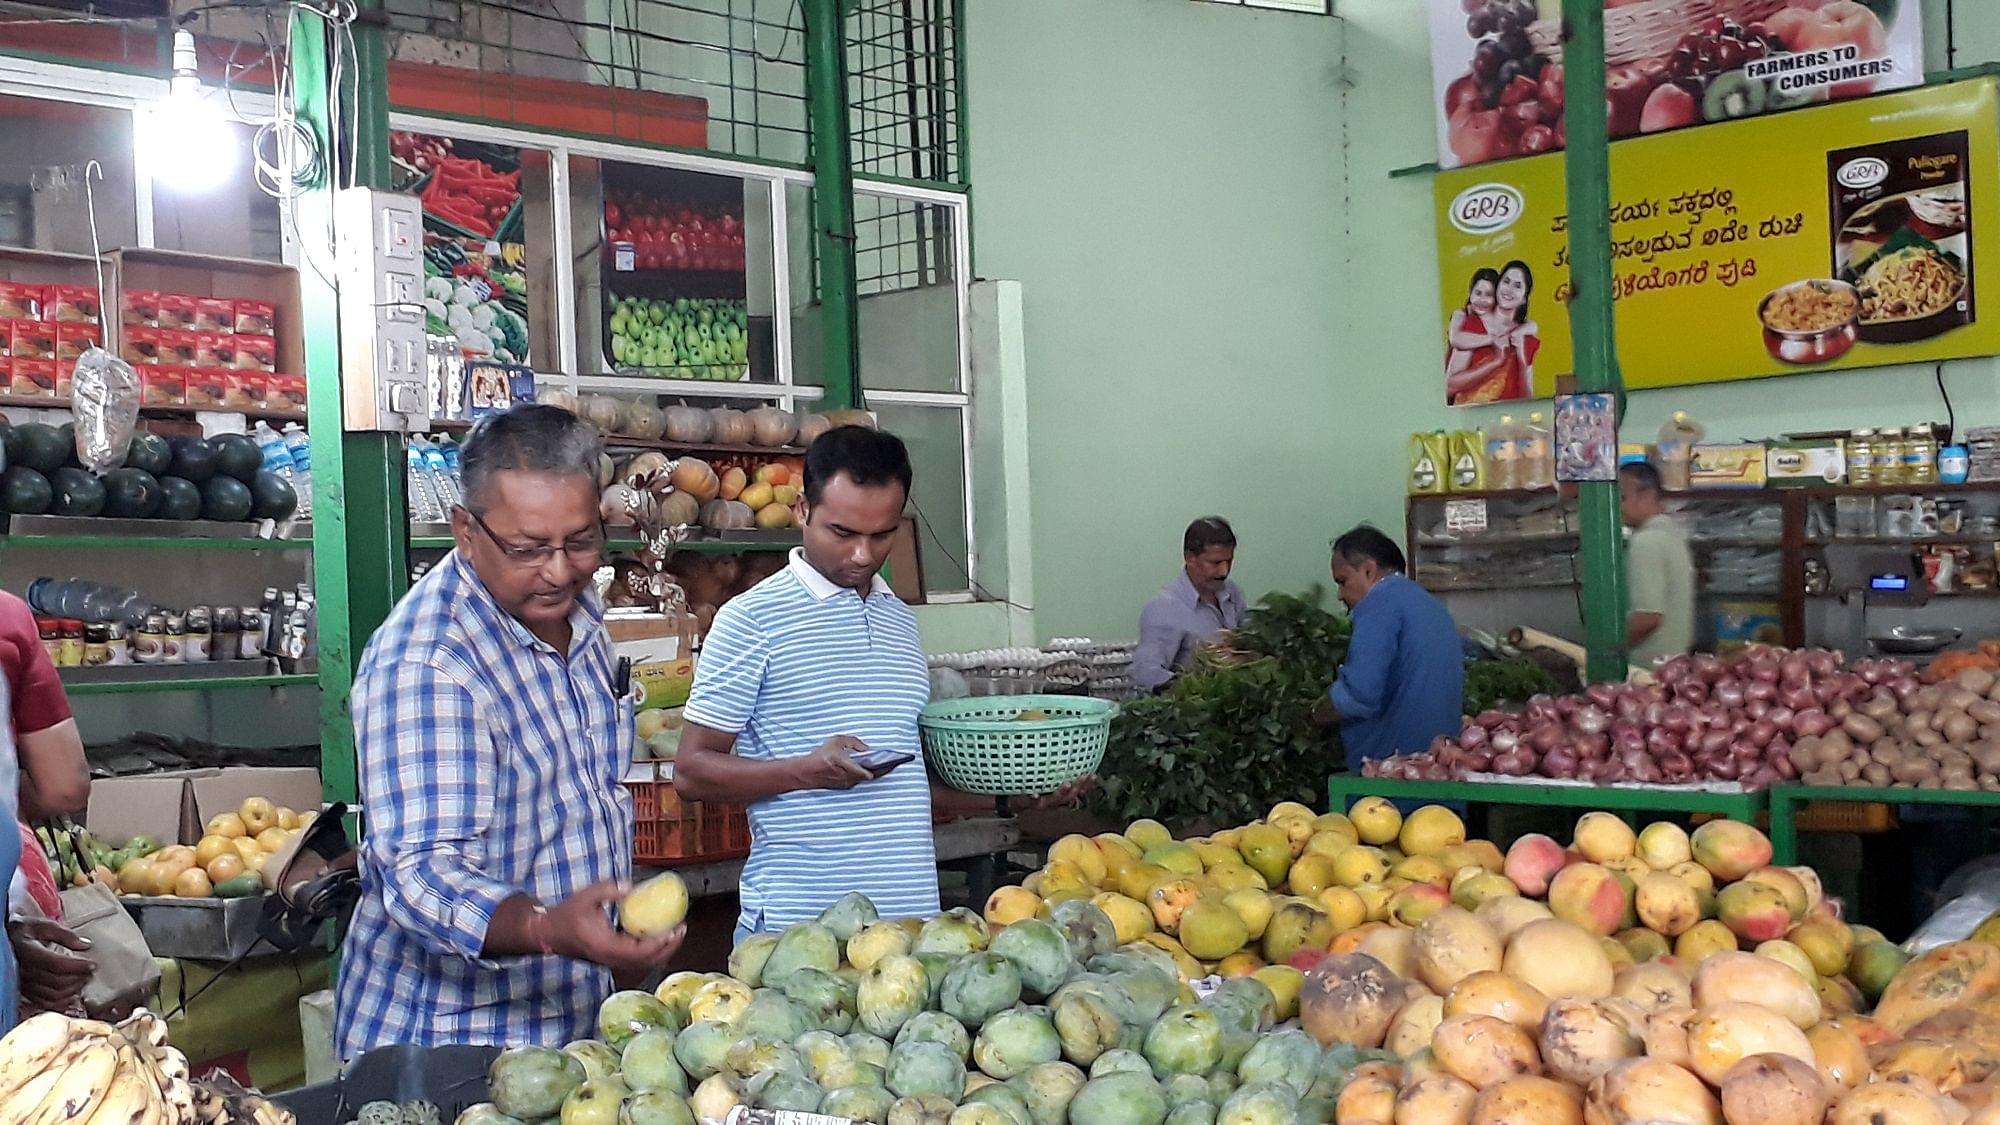 The Nipa virus scare affected sales and brought down mango prices.